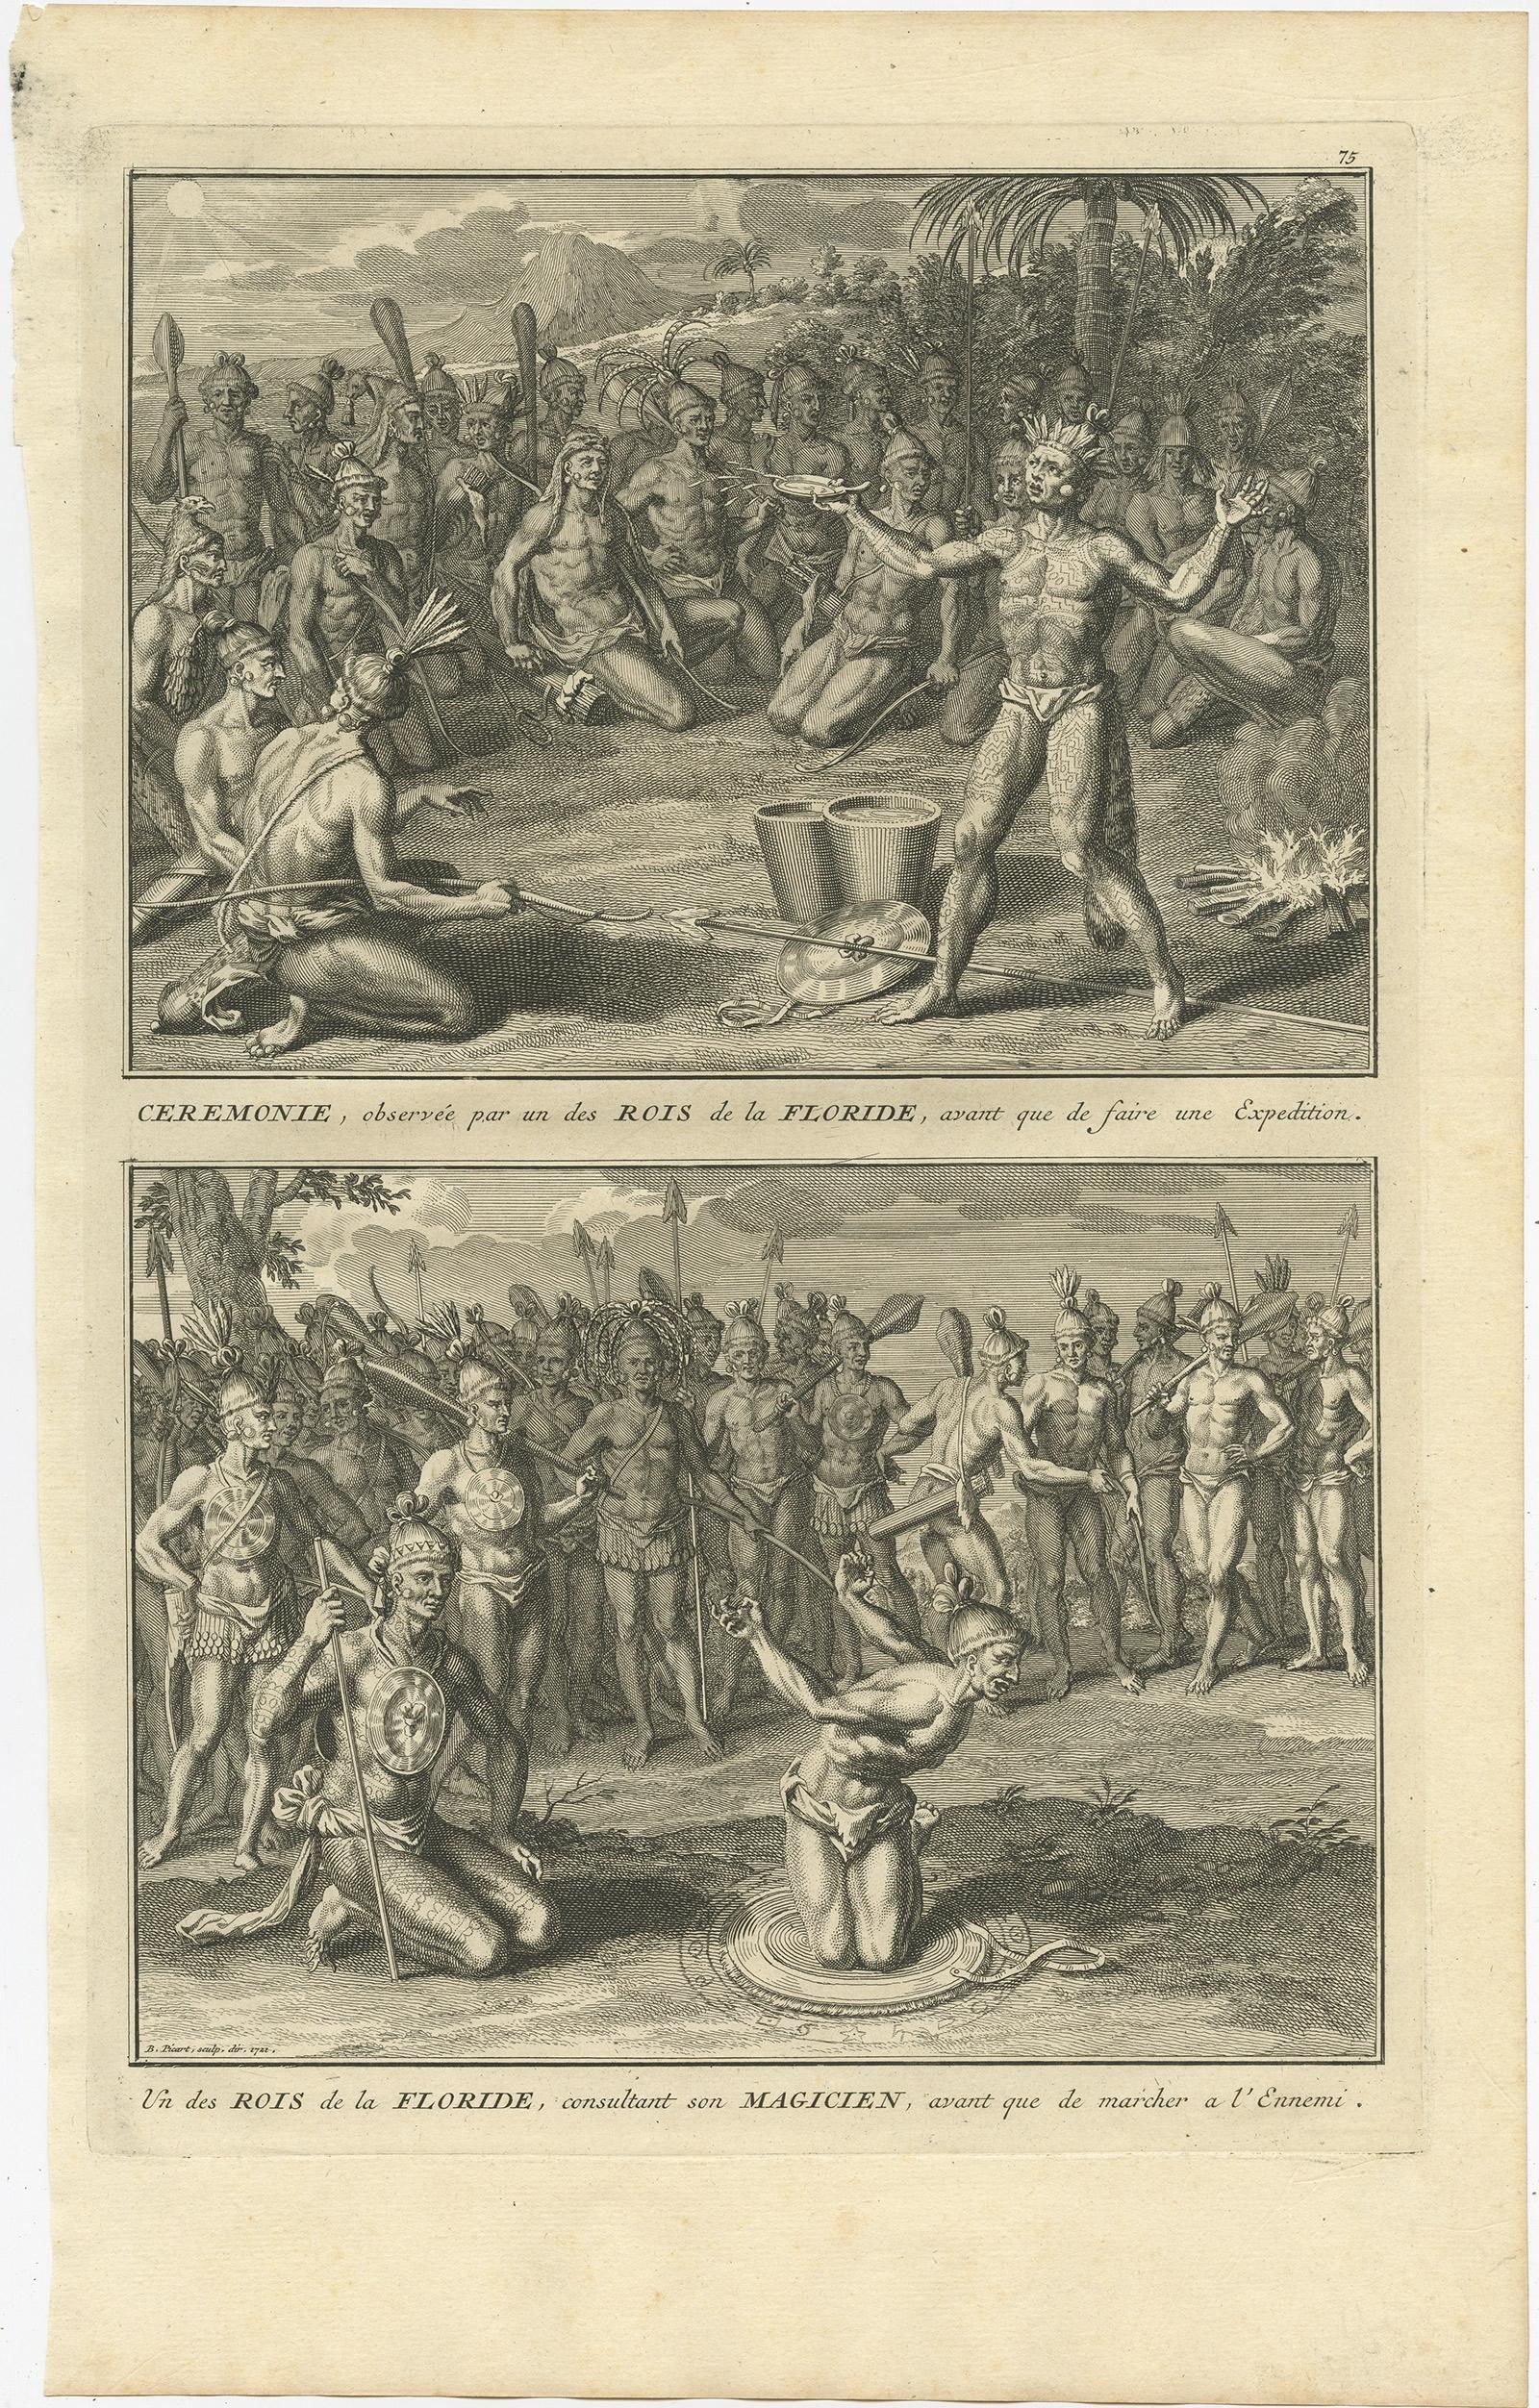 Antique print titled 'Ceremonie, observée par un des Rois de la Floride (..)'. 

Two images on one sheet. 

1. A ceremony that takes place before they set-off on an expedition, attended and observed by a Floridian King. 

2. A Floridian King